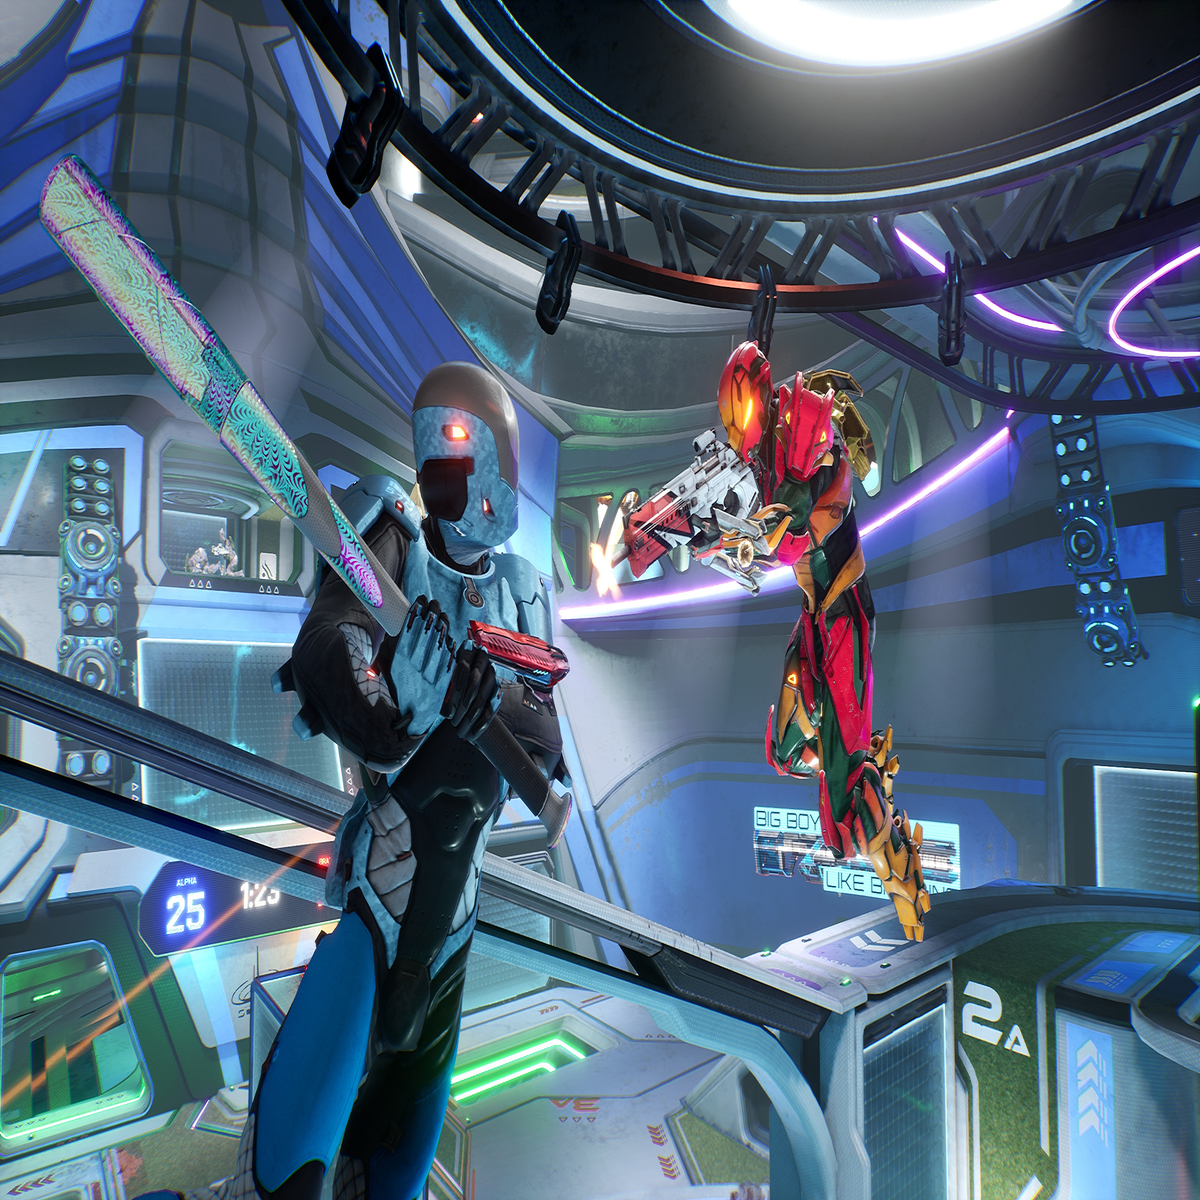 Splitgate Season 0 - All Stages and Challenges